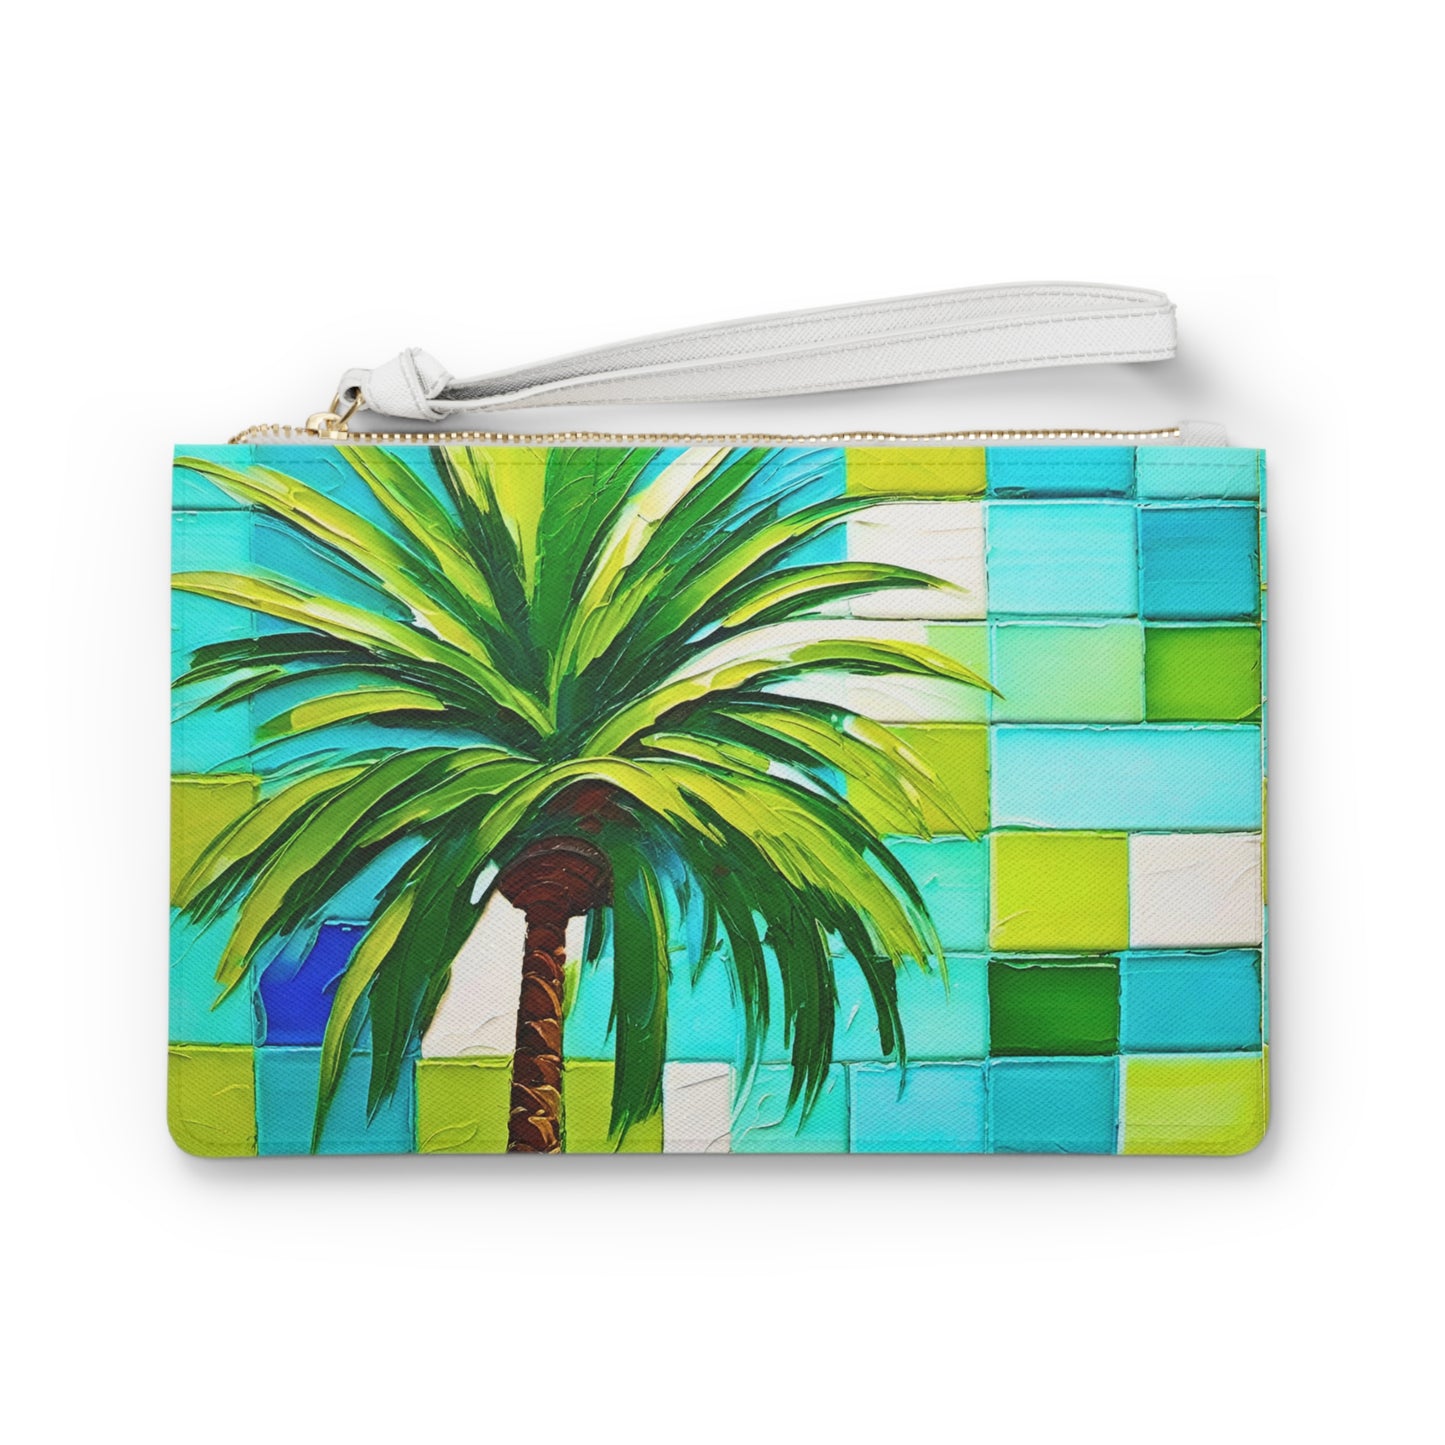 Turks and Caicos Palm Tree Poolside Tile Ocean Vacation Travel Pouch Clutch Bag